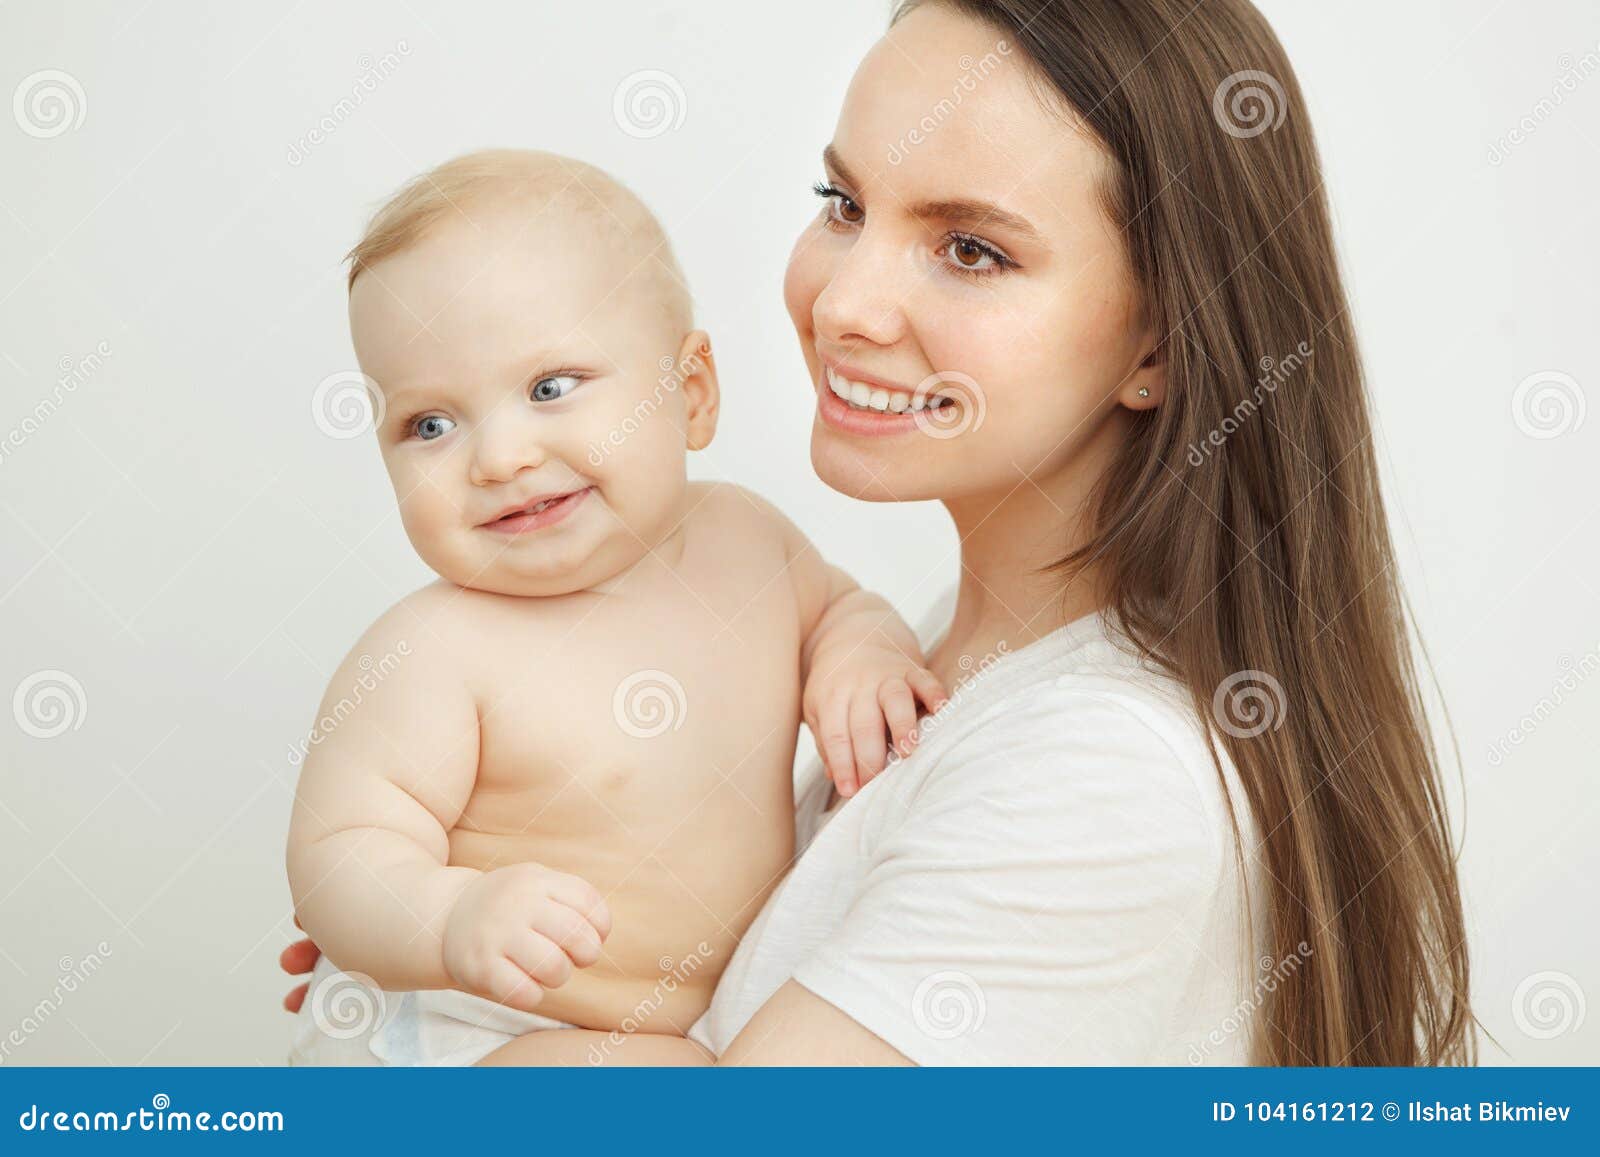 smiling happy baby in mothers`s hand. little enfant toddler